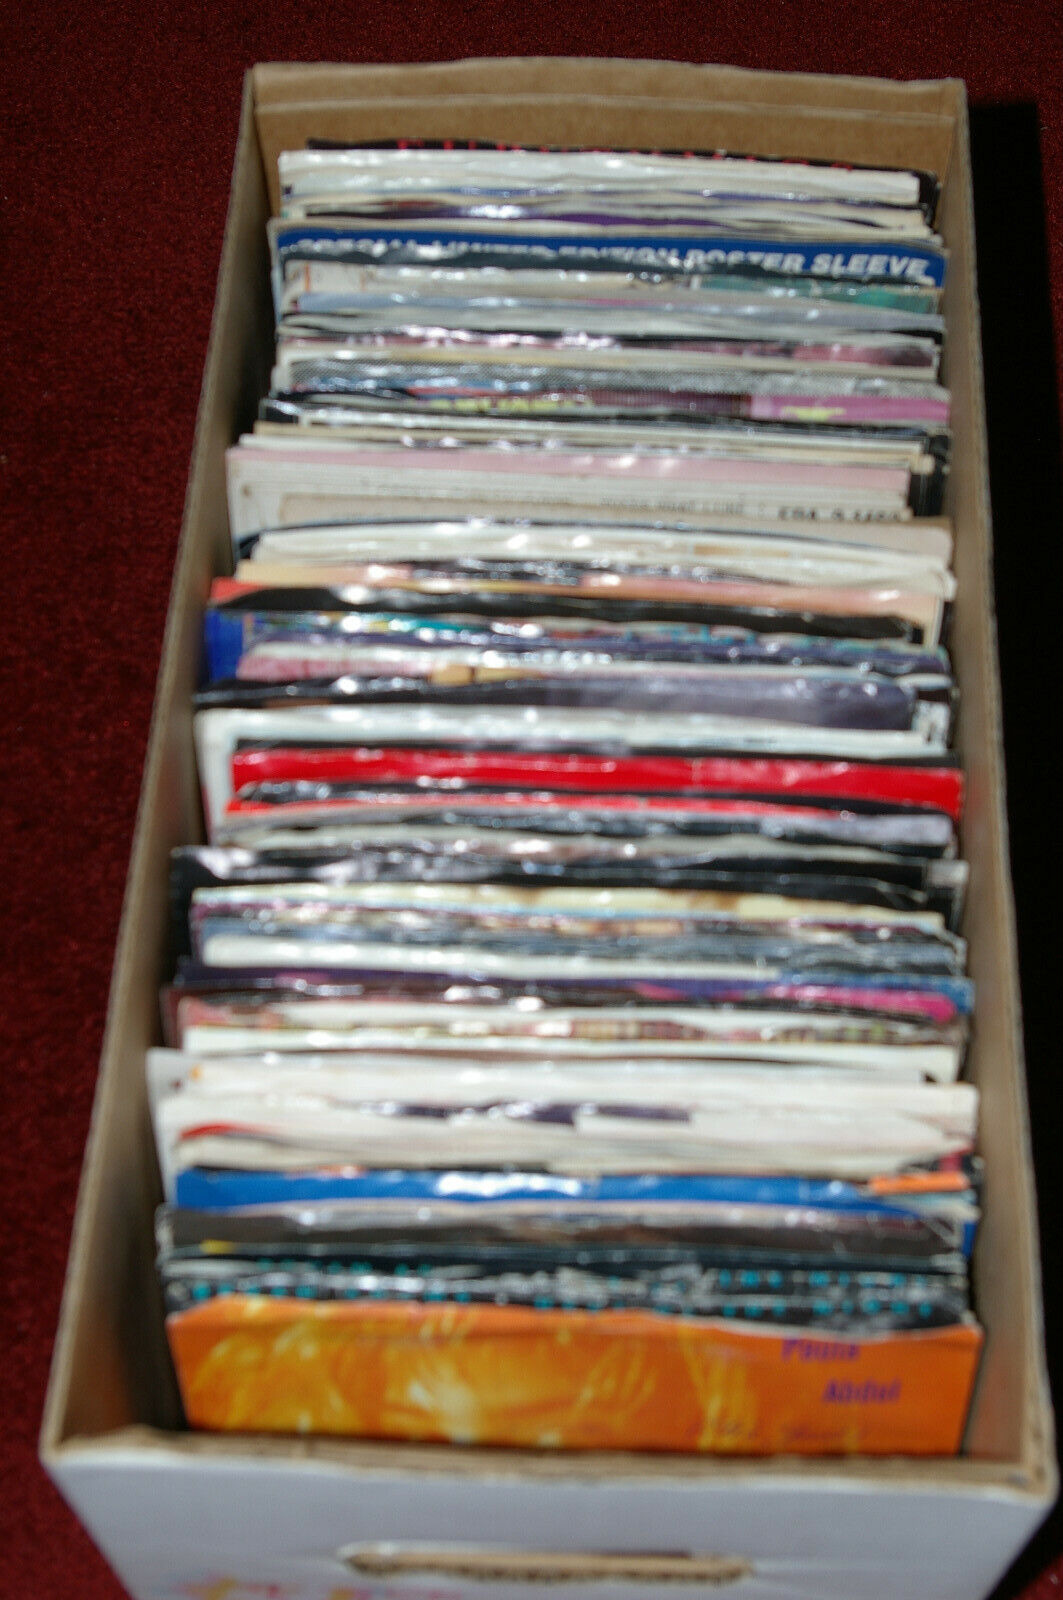 LOT OF45 RPM PICTURE SLEEVES & RECORD 1970's 80's 90's 6-PACK for $10 YOU PICK!